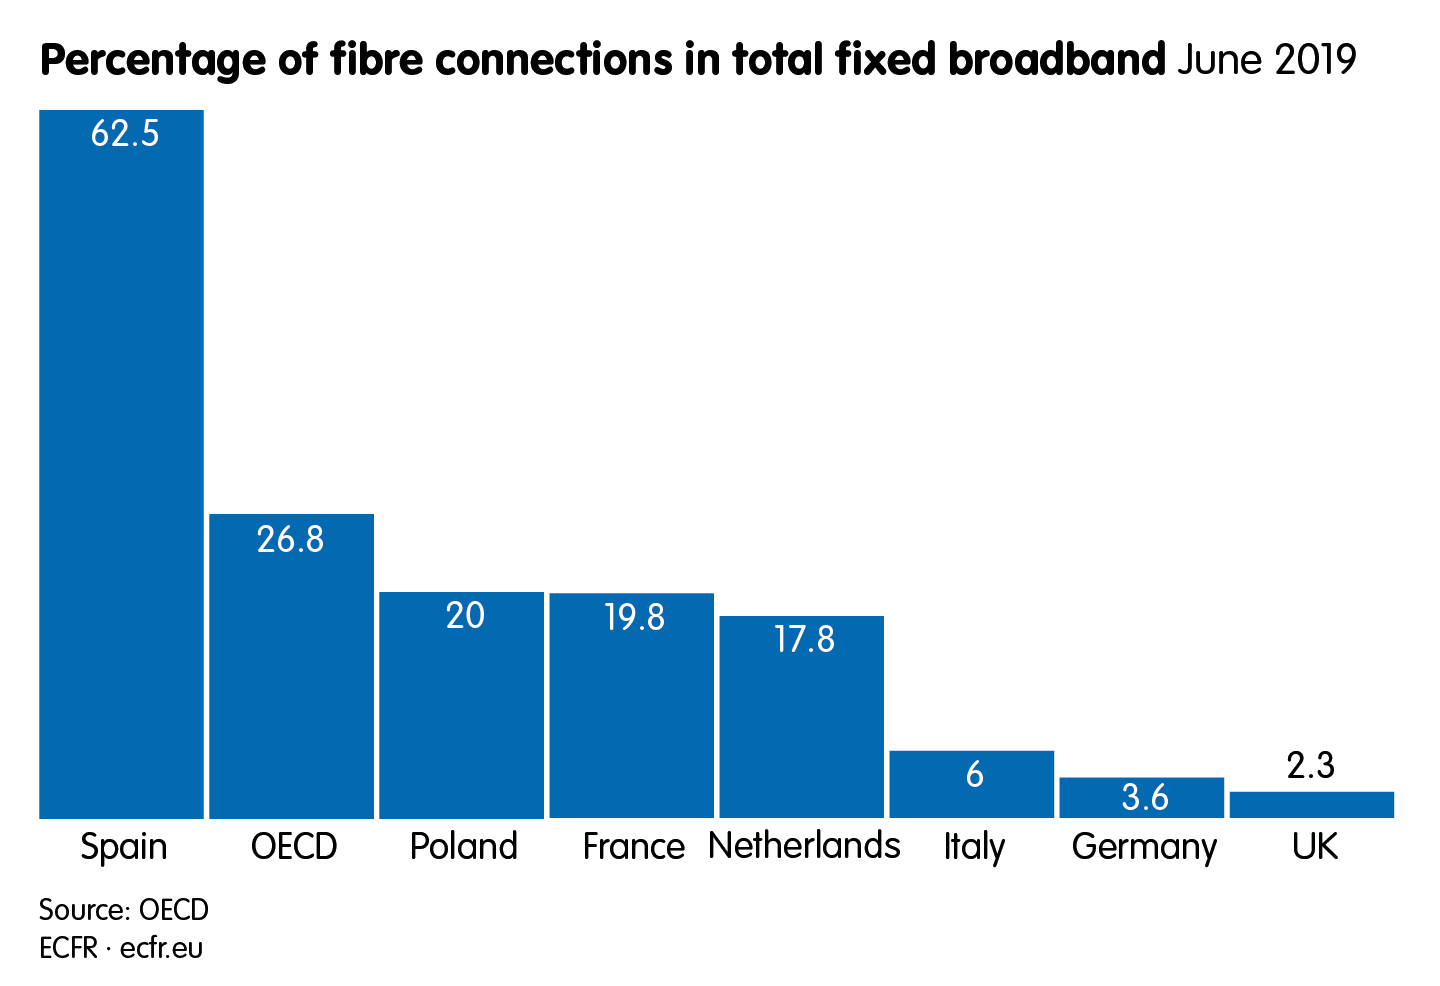 Percentage of fibre connections in total fixed broadband, June 2019